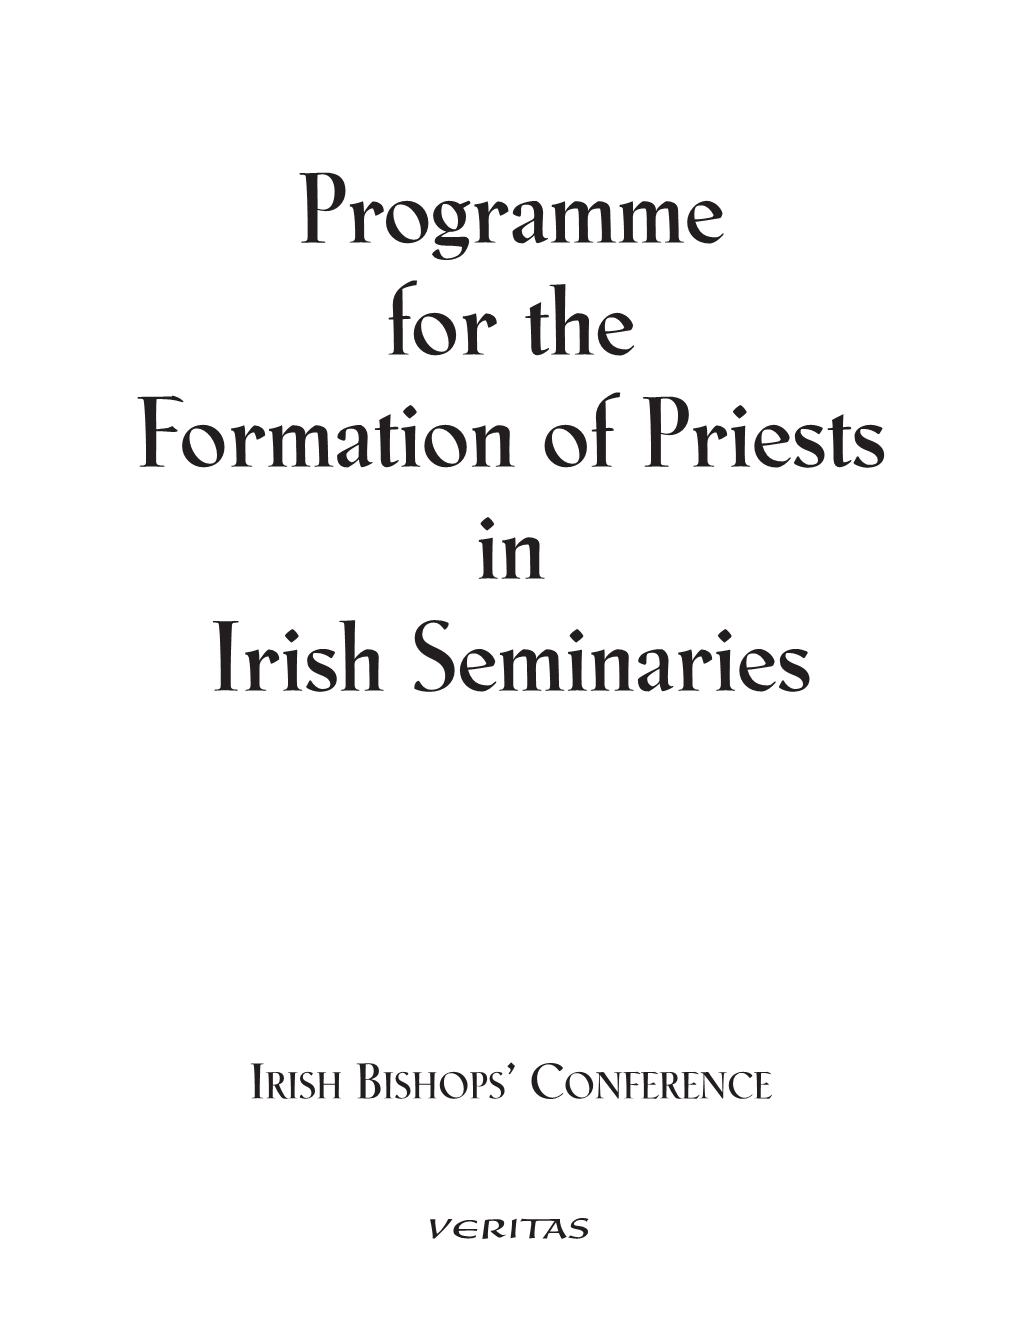 Formation of Priests-Final